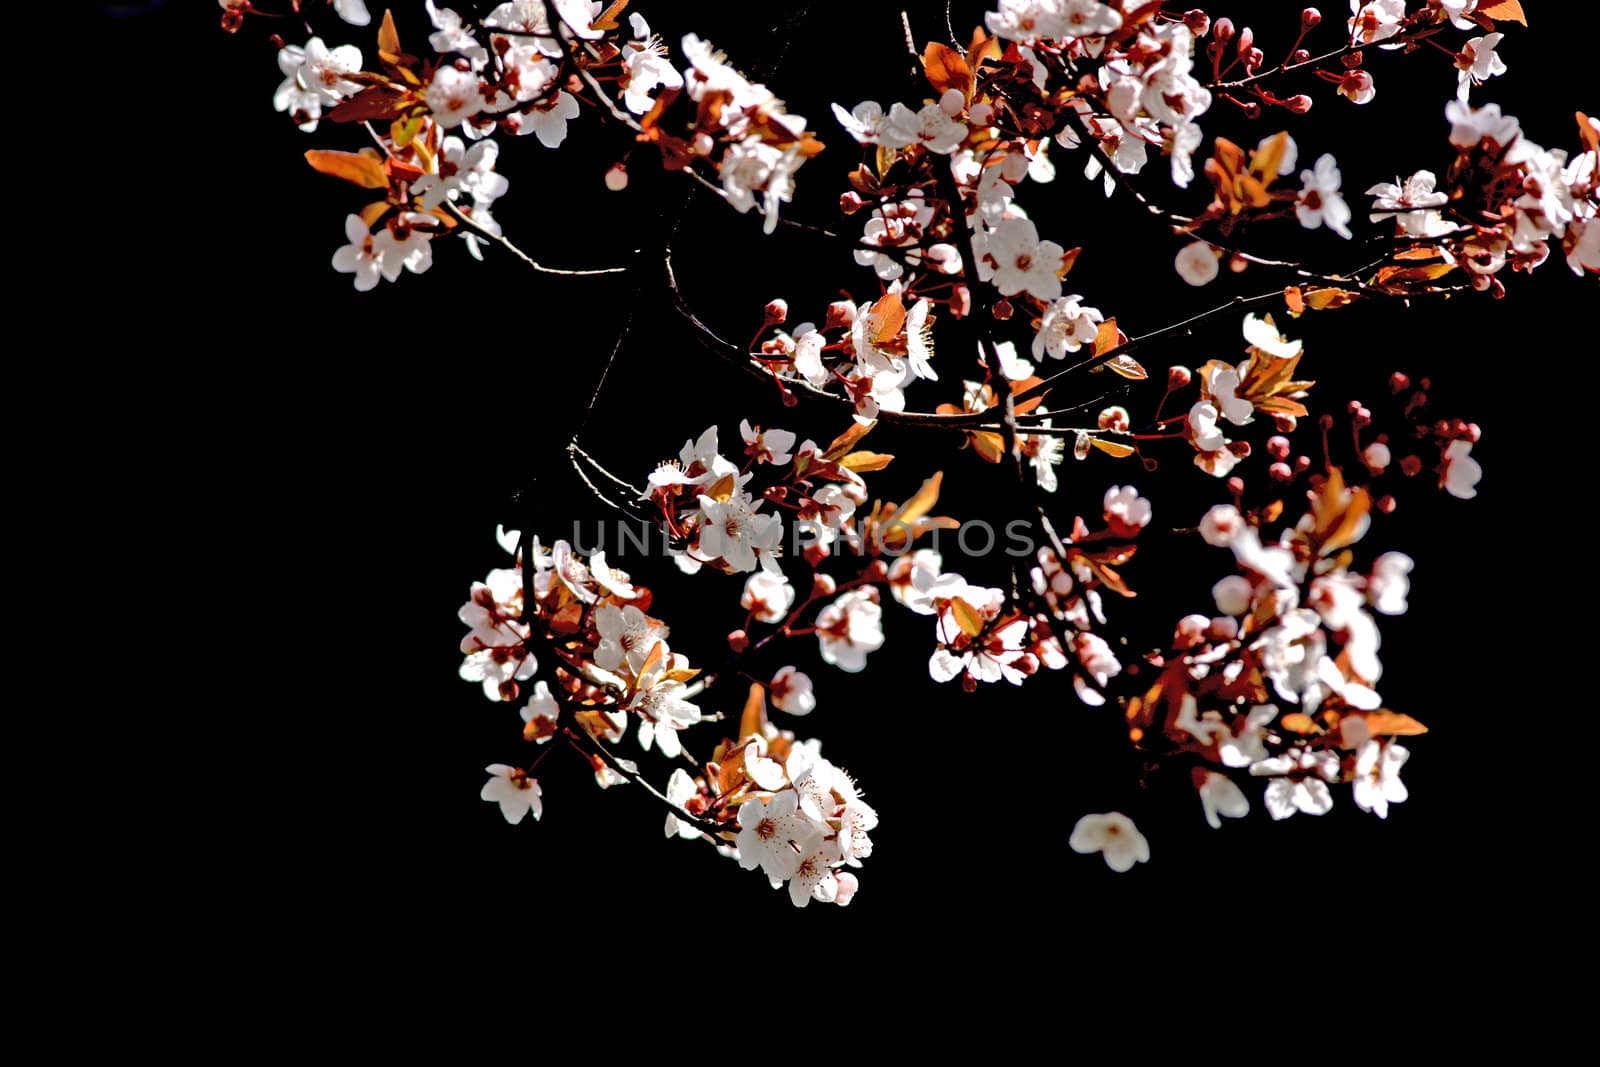 Close view of a cherry tree branch in bloom in front of a black background